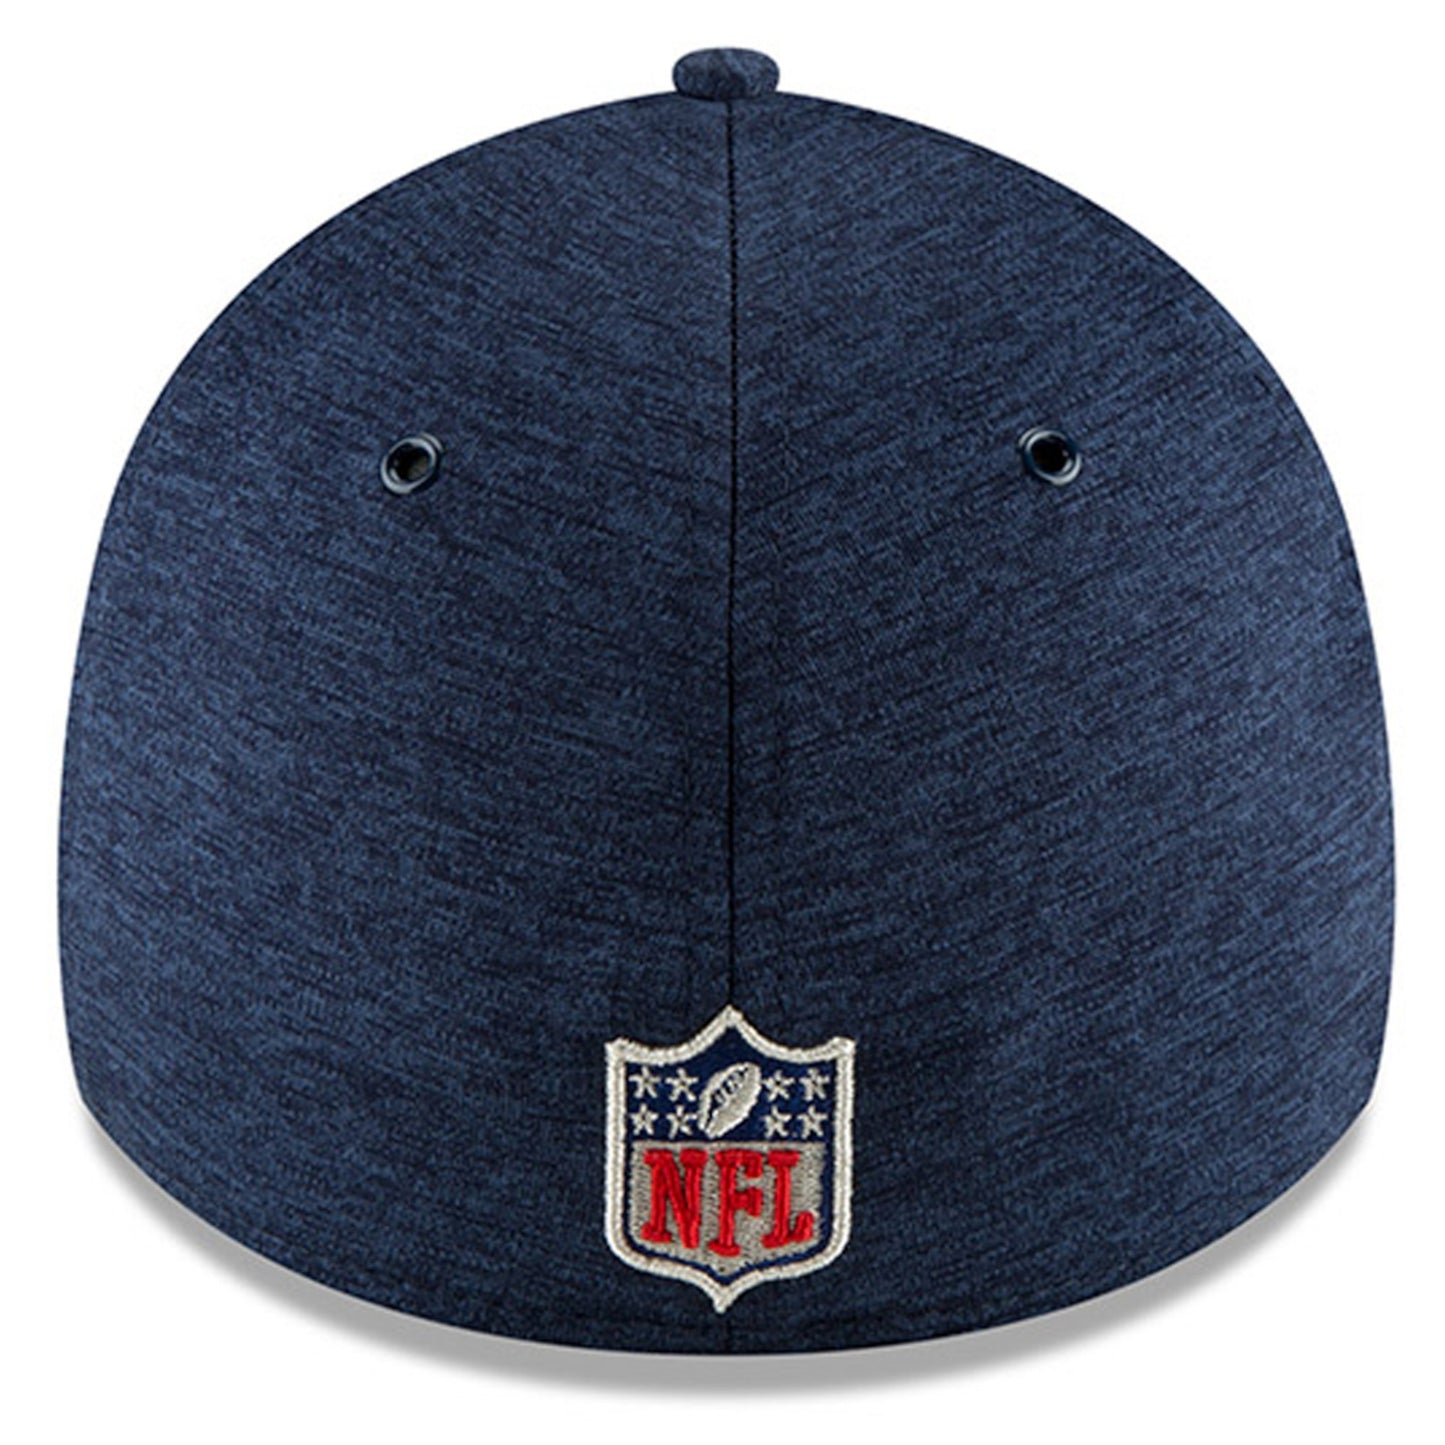 Men's New England Patriots New Era Navy/Gray NFL18 Sideline Home Official 39THIRTY Flex Hat